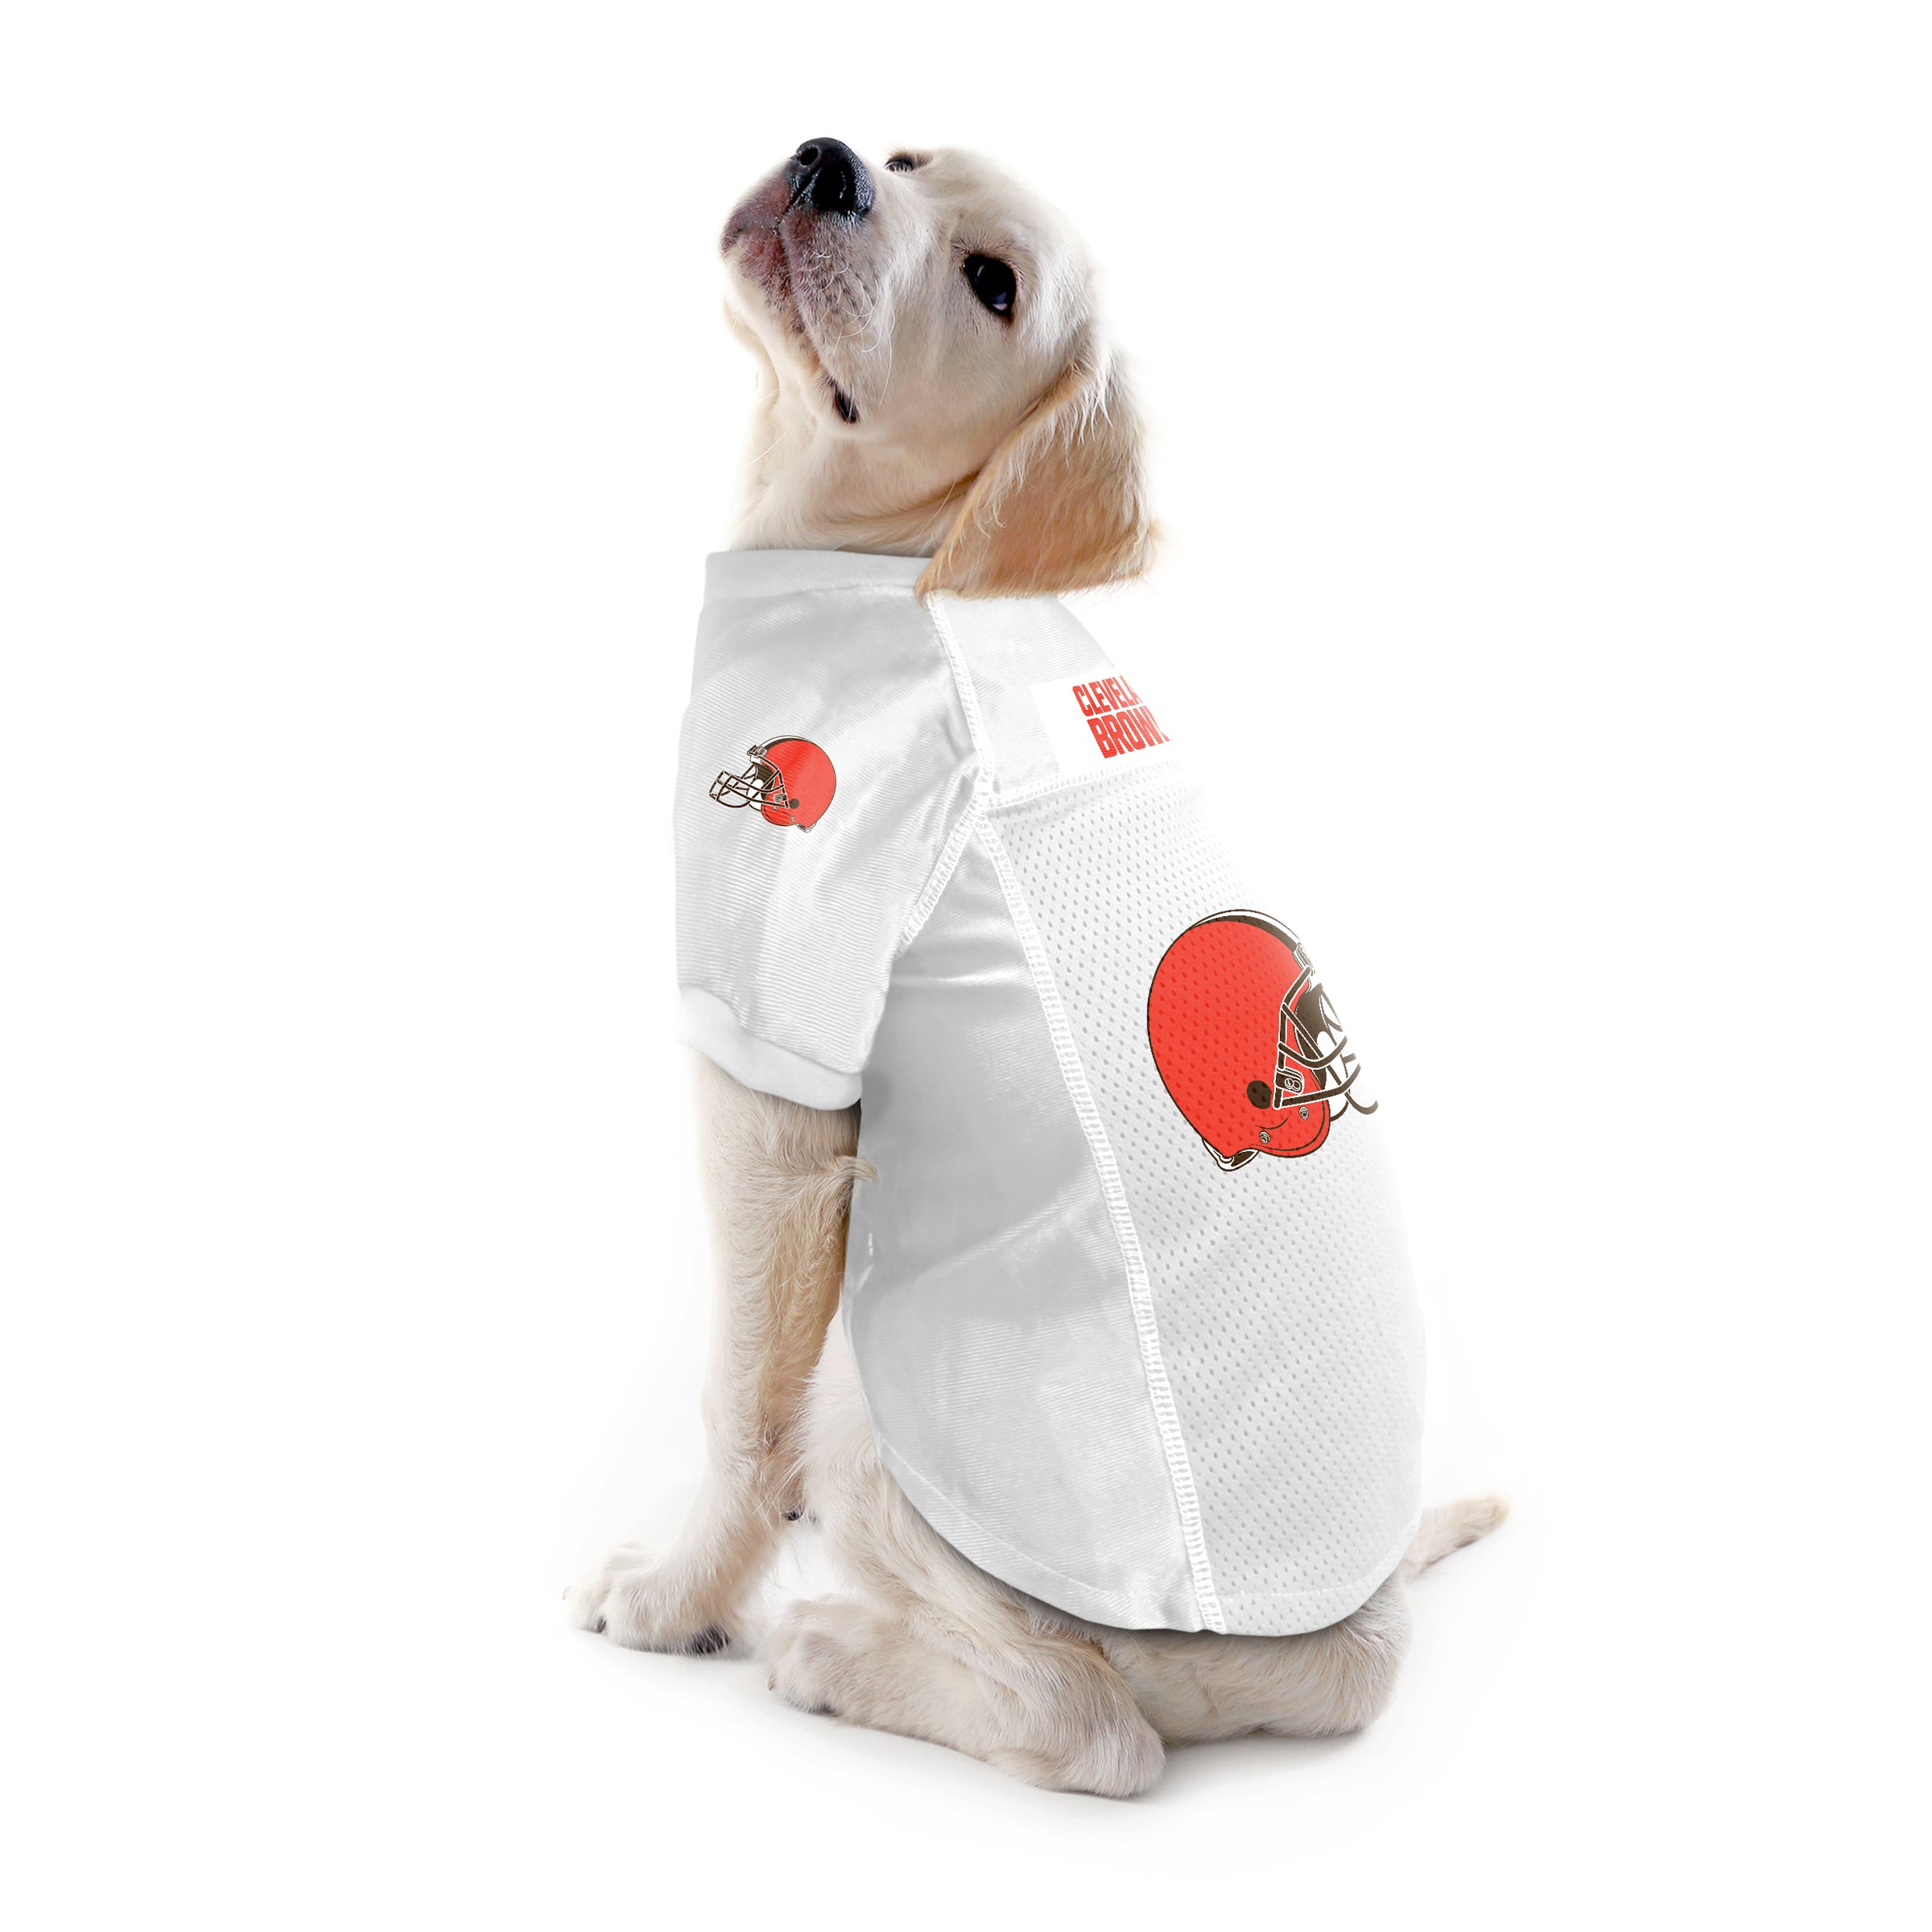 browns cat jersey